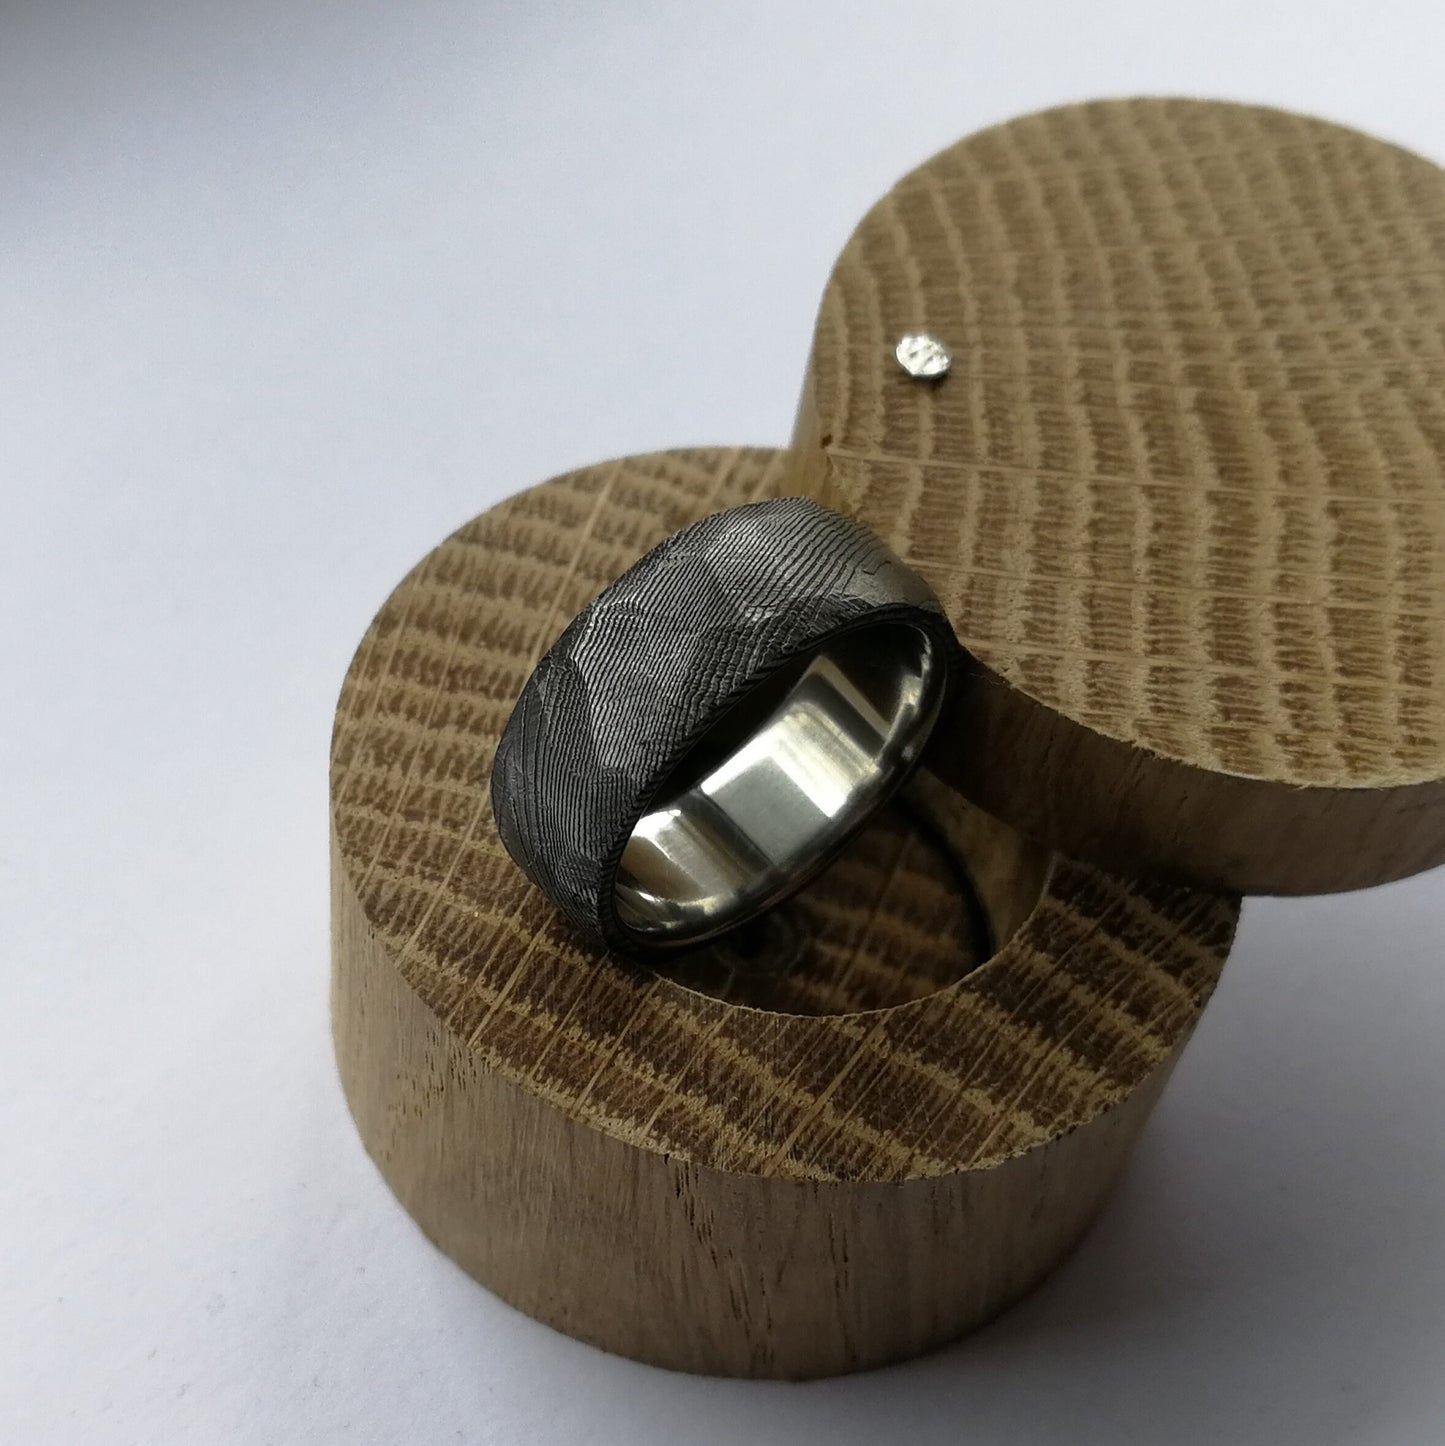 Unique Handmade Faceted Stainless Damascus Steel Ring with Polished Titanium Inner Lining.